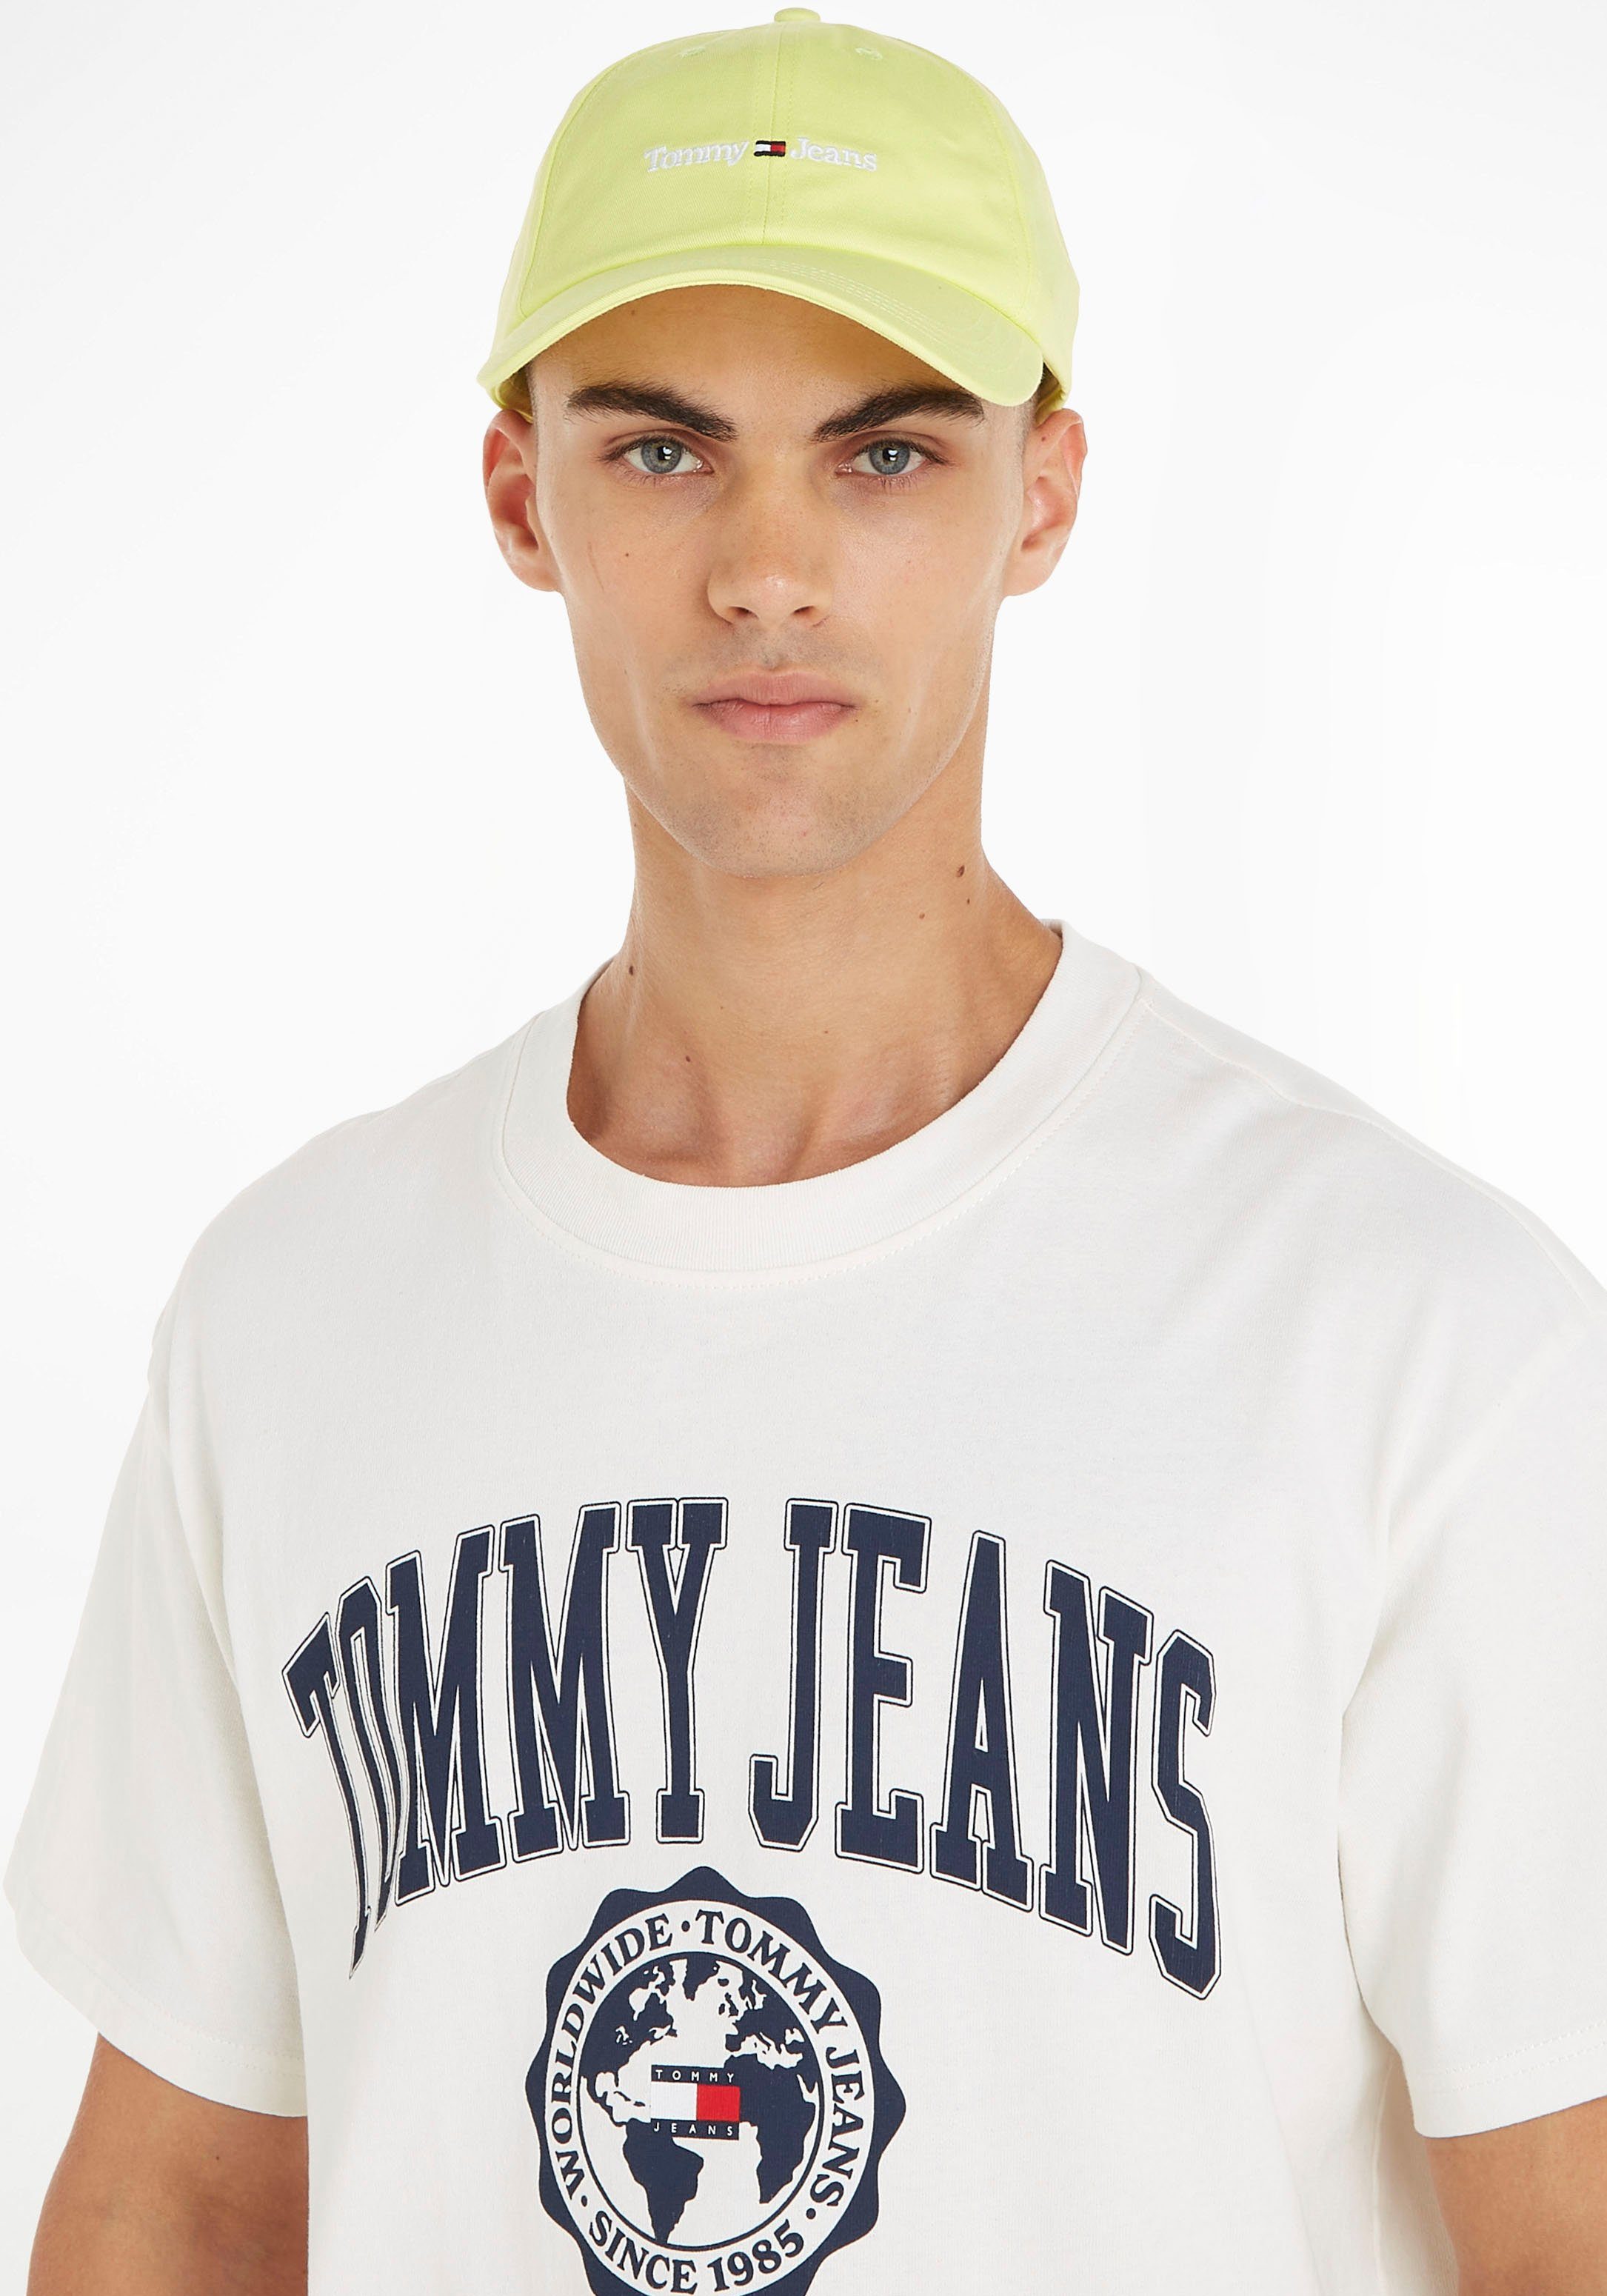 limone Jeans Tommy Jeans Logostickerei Baseball mit Cap Tommy